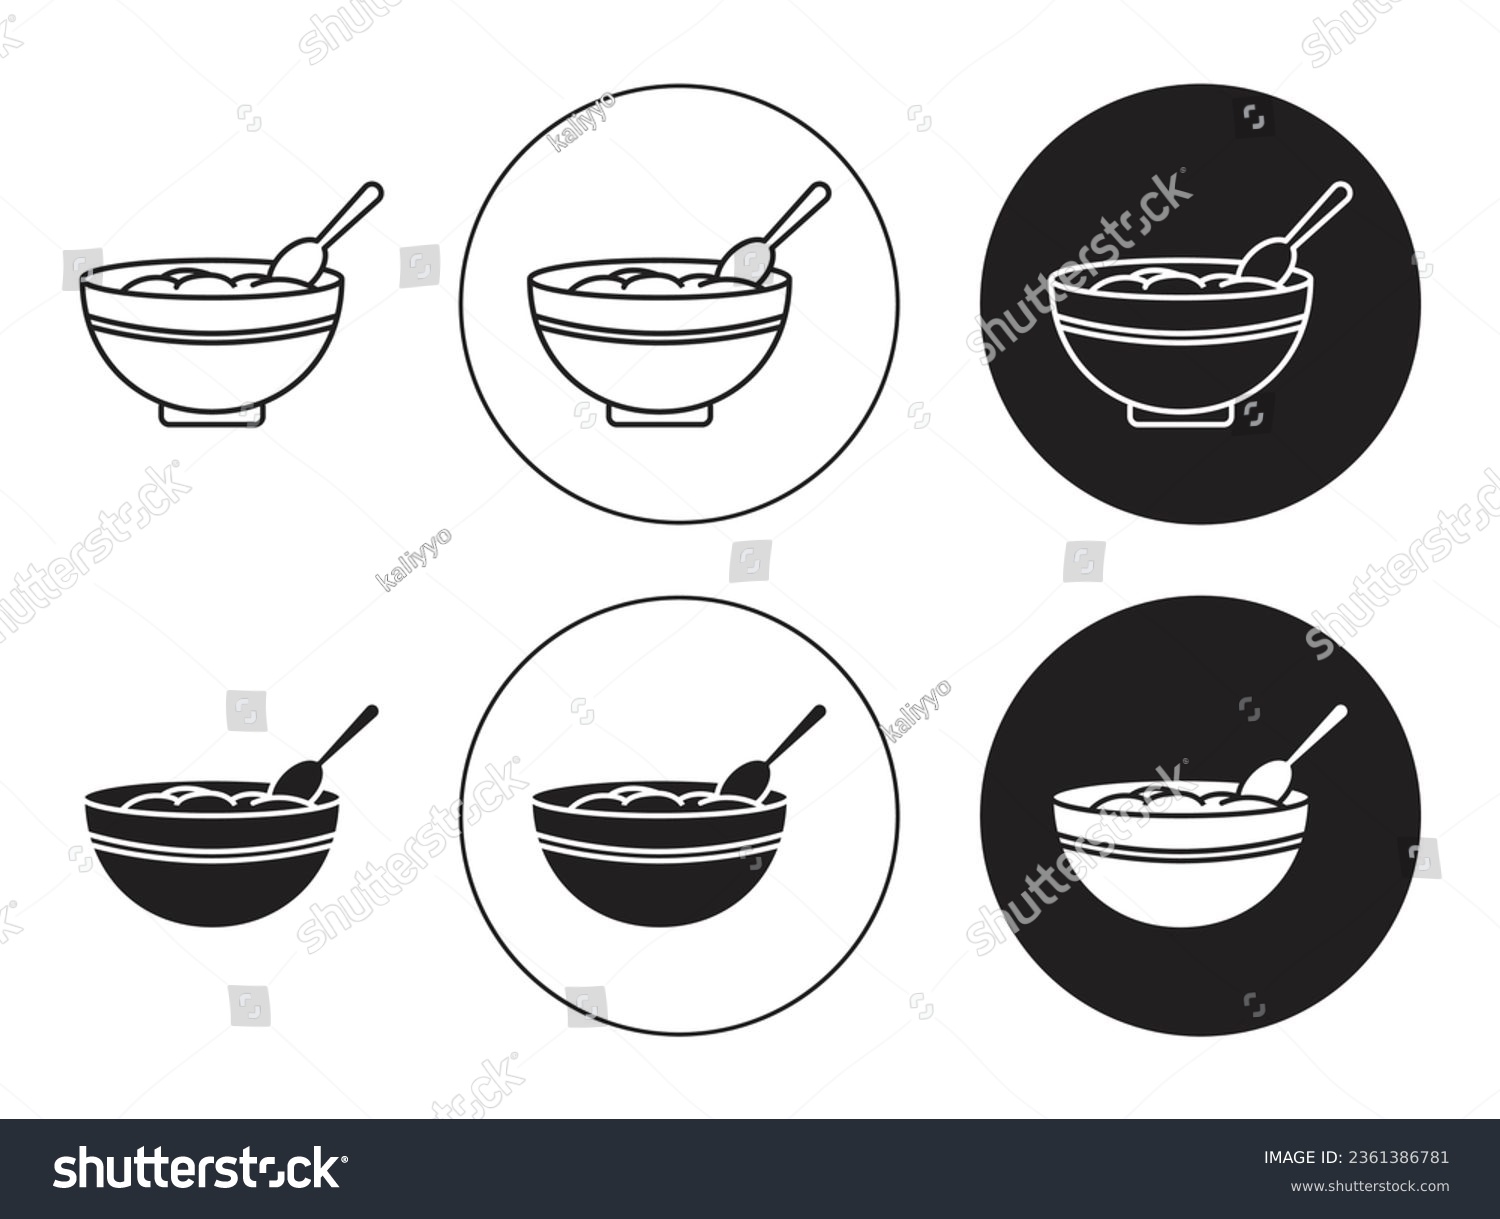 SVG of porridge icon set. cereal bowl vector symbol. rice food meal bowl with spoon sign in black filled and outlined style. svg